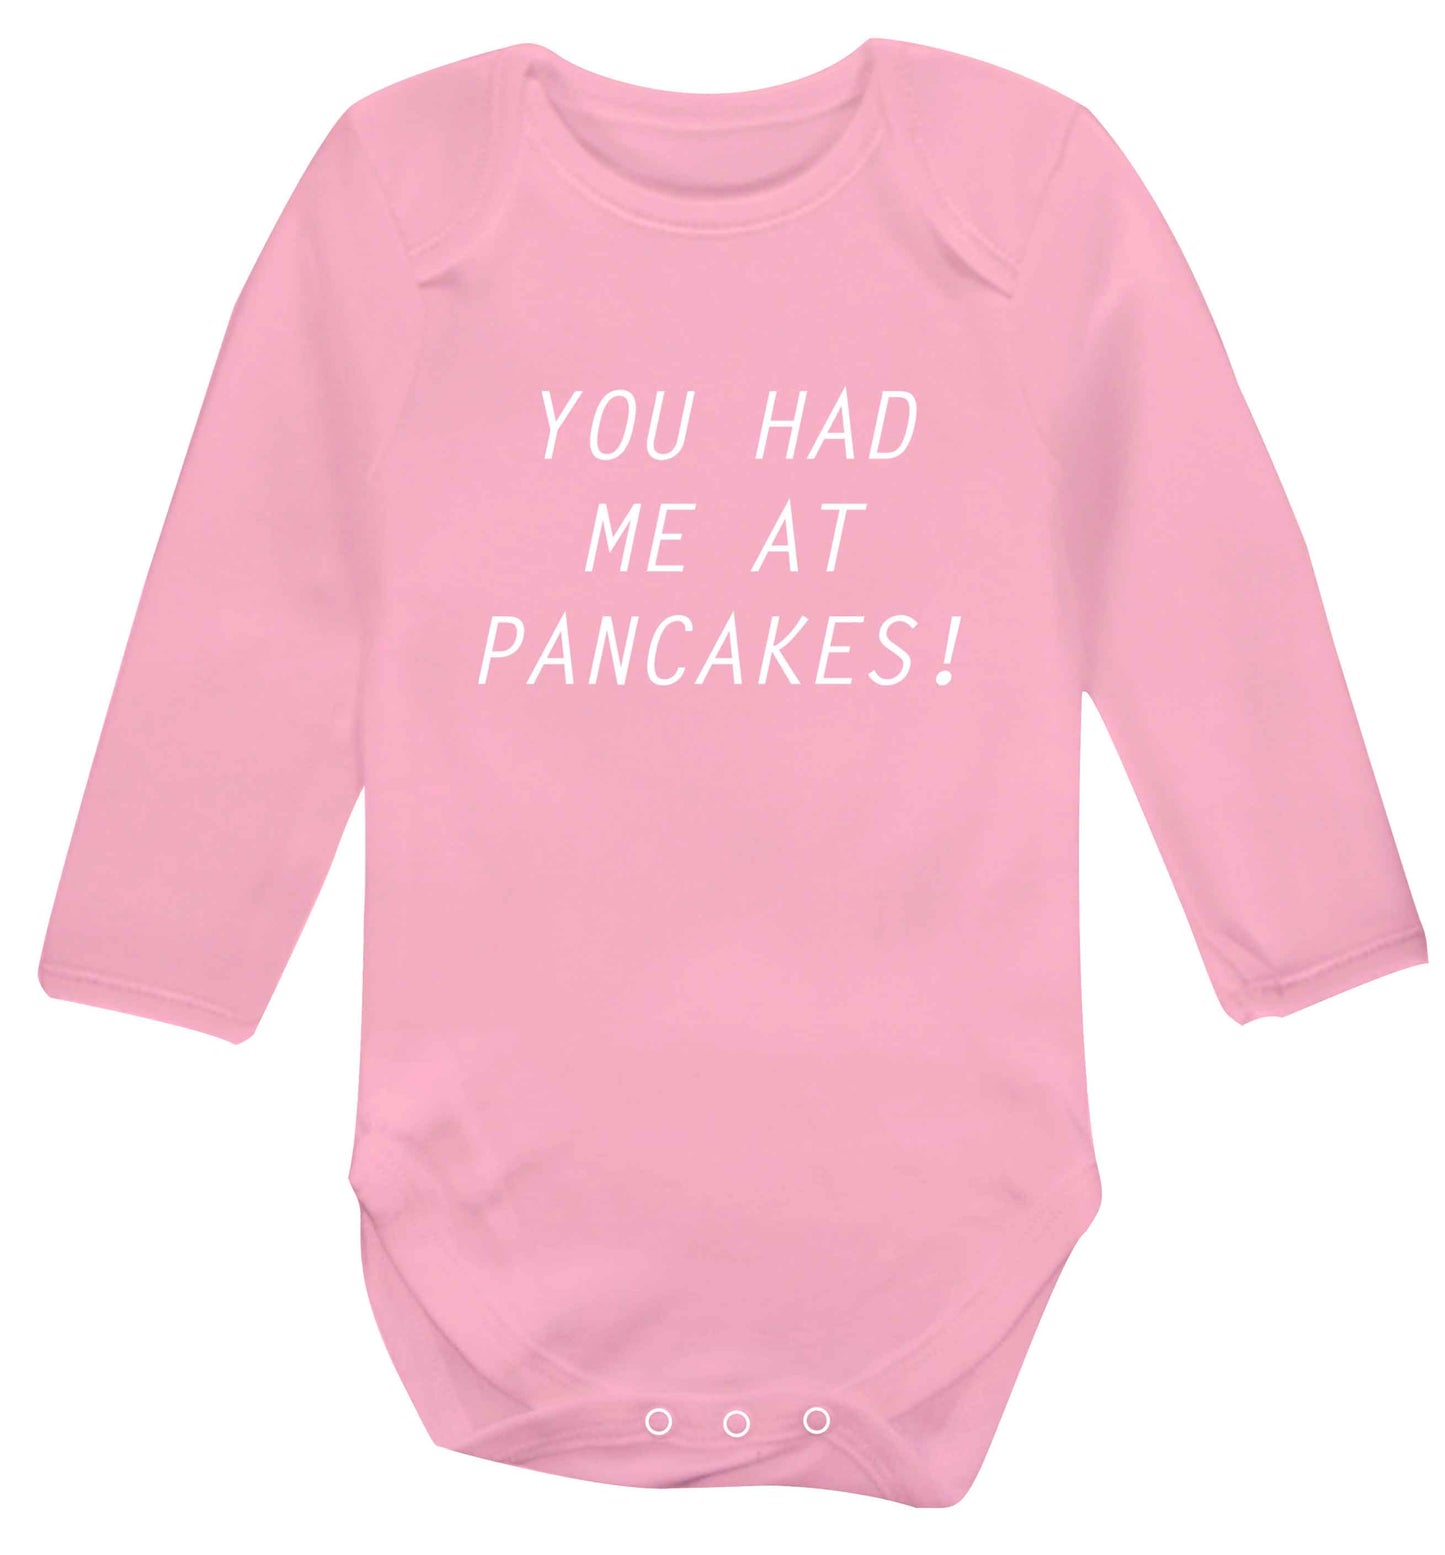 You had me at pancakes baby vest long sleeved pale pink 6-12 months